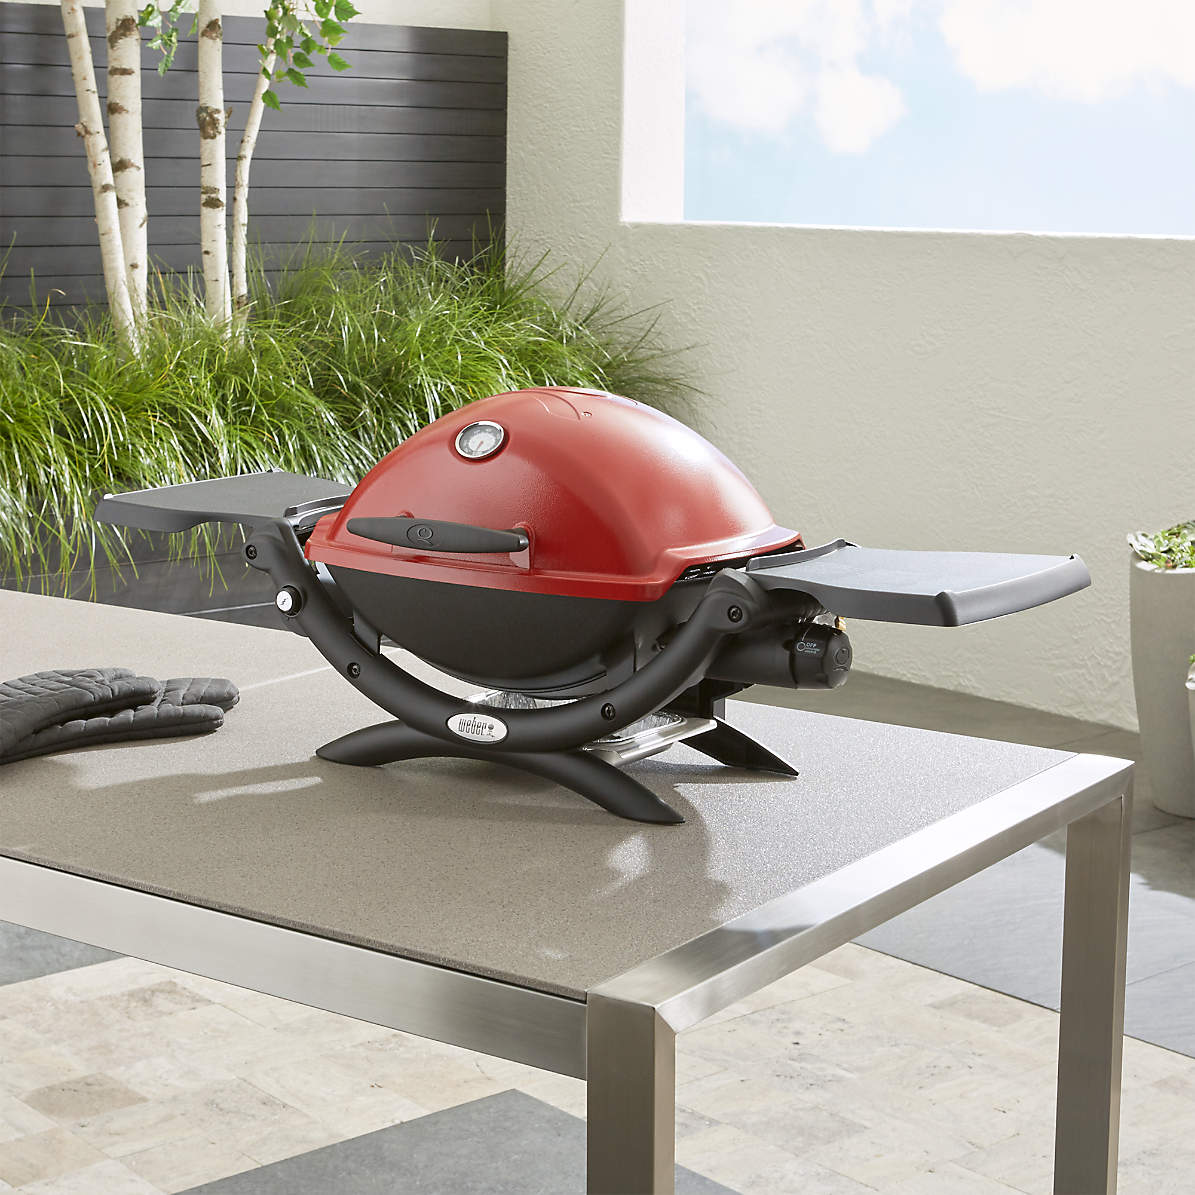 overdrive krybdyr Niende Weber Q 1200 Red Liquid Mini Portable Tabletop Propane Gas Outdoor Grill +  Reviews | Crate & Barrel